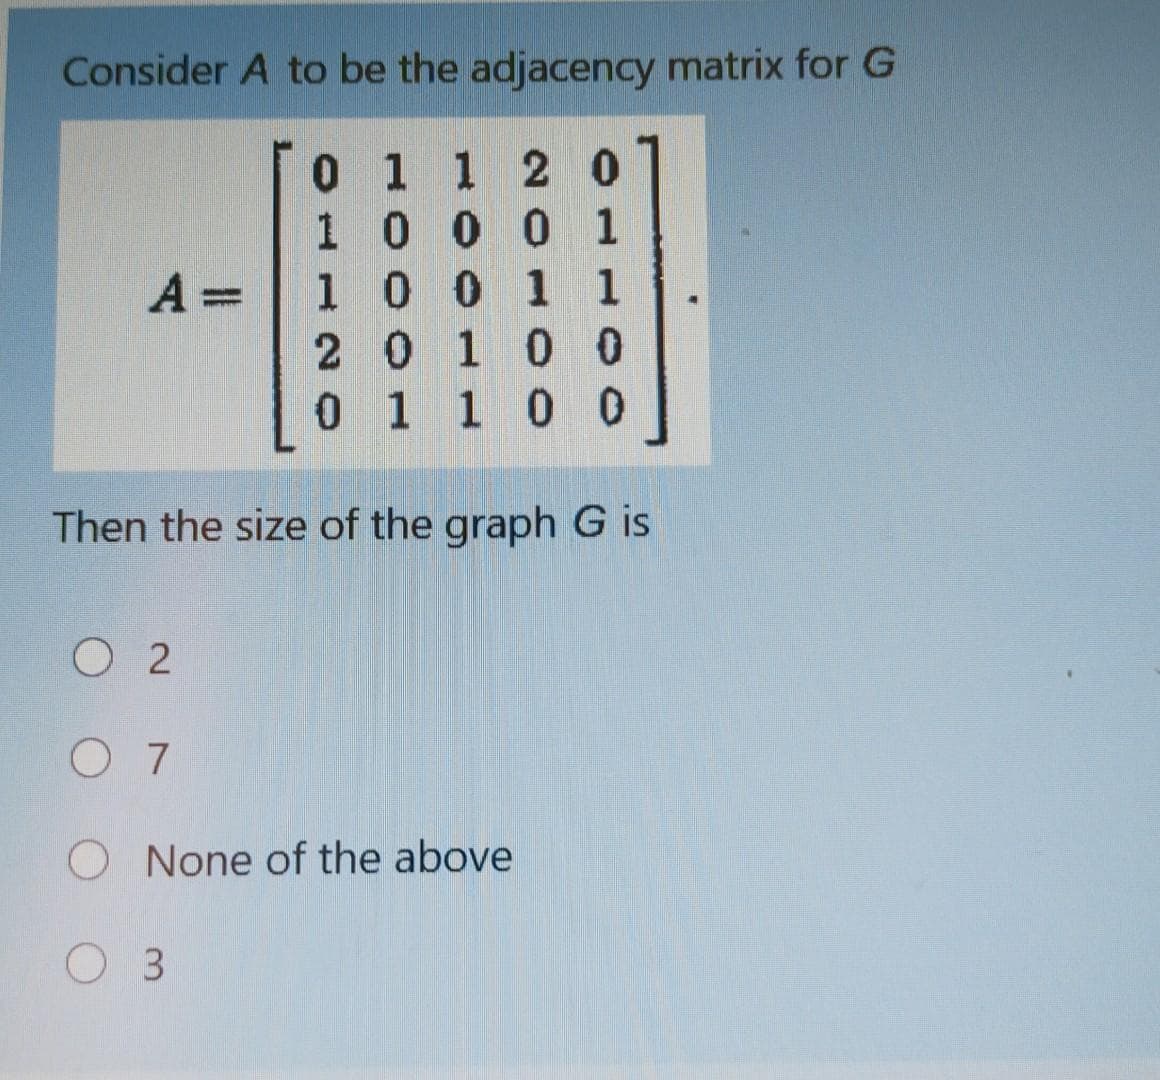 Consider A to be the adjacency matrix for G
0 1 1 2 0
0 1
1000 1
100 1 1
2 0100
0 1 1 00
A =
Then the size of the graph G is
O 2
O 7
O None of the above
O 3
